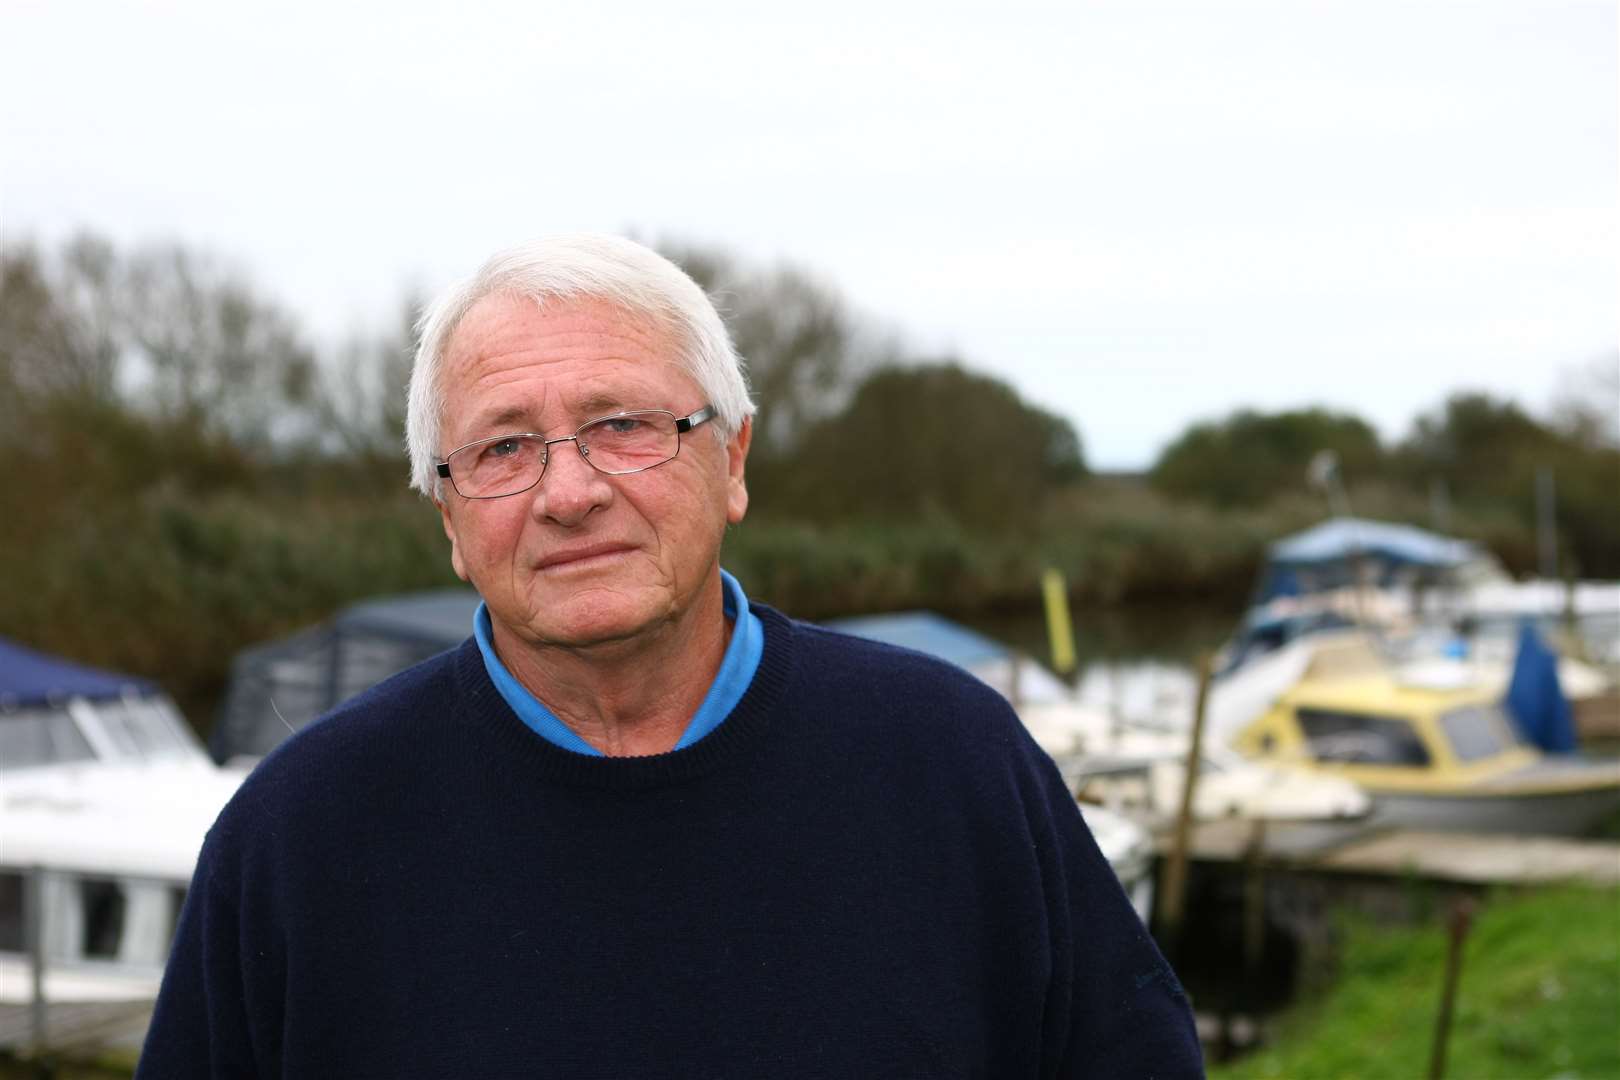 Stuart Cullen and fellow boatmen have plucked people out of the Stour